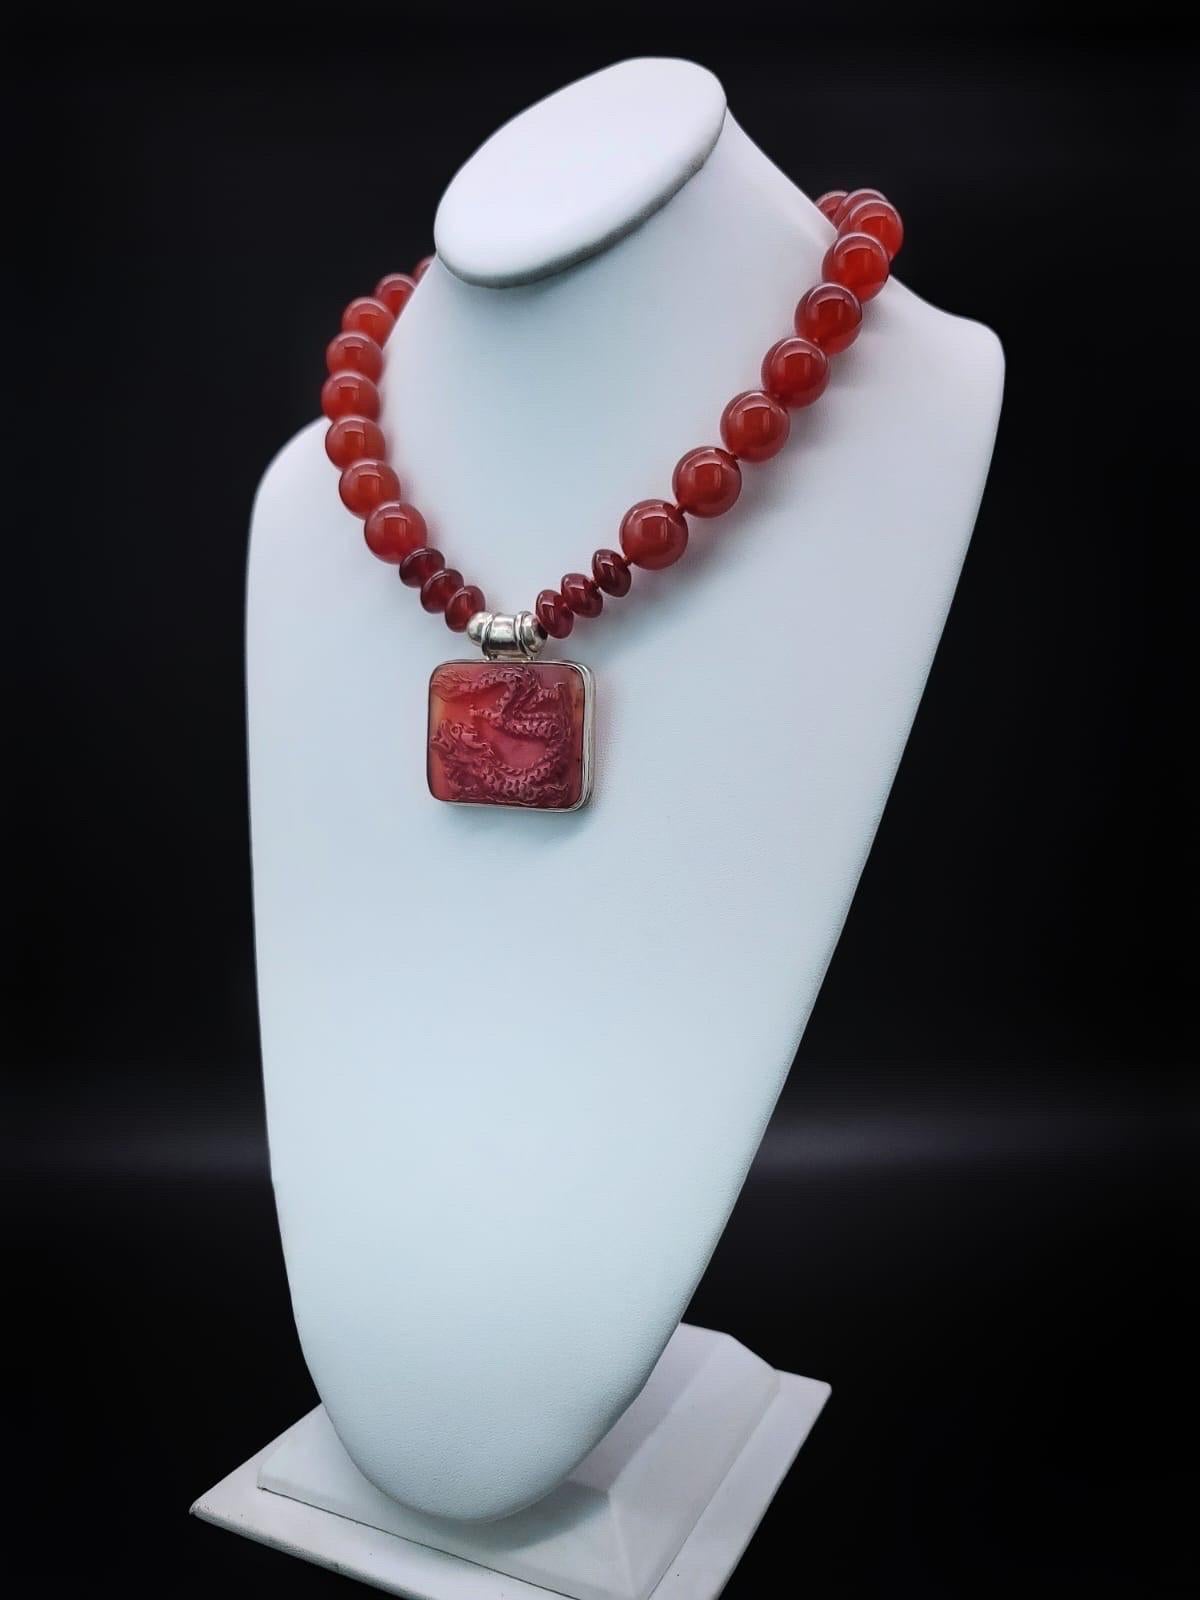 Bead A.Jeschel Powerful Carnelian necklace with a Dragon pendant. For Sale